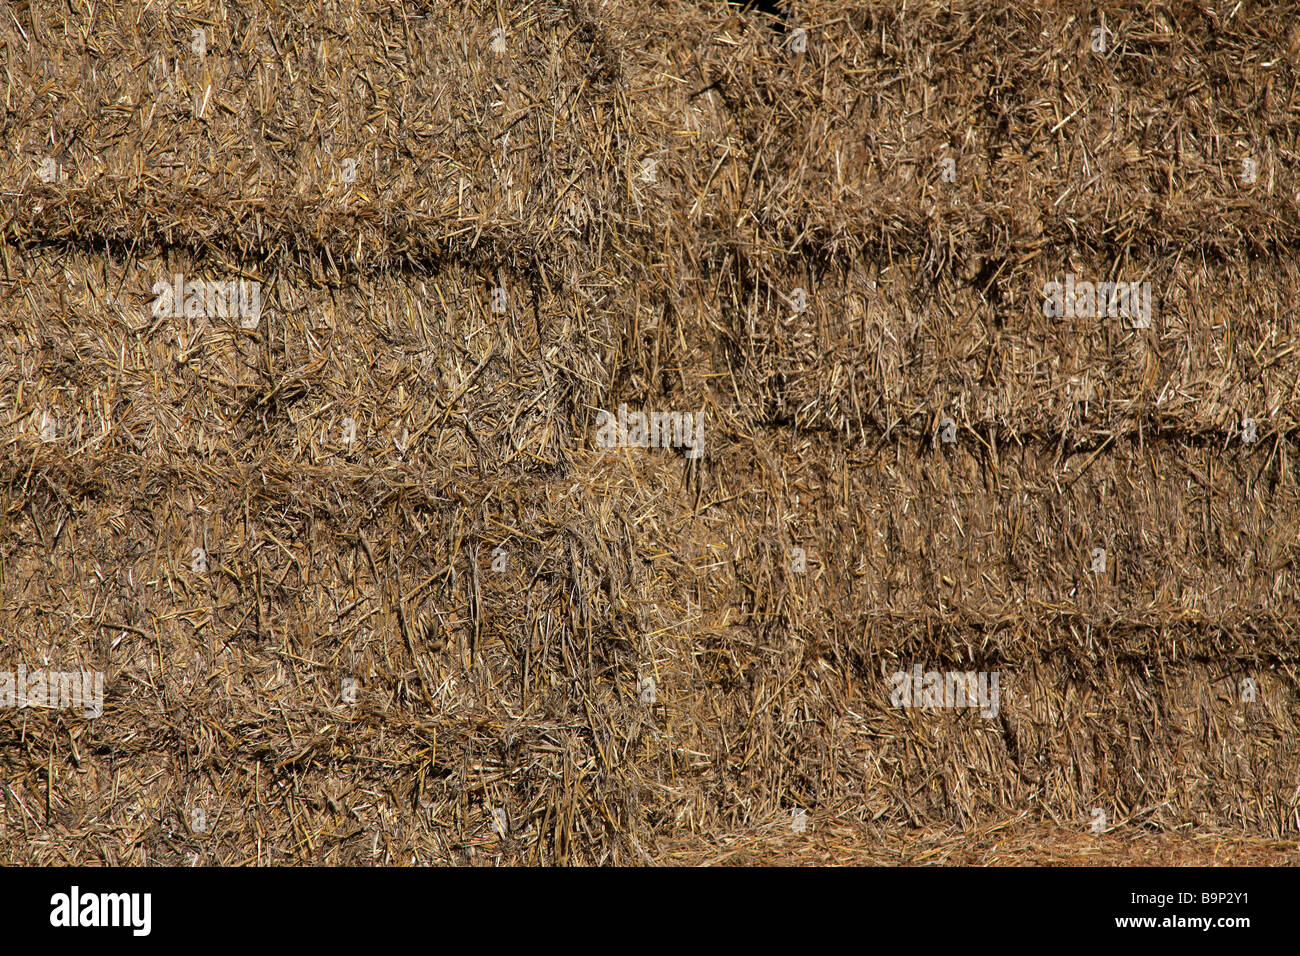 Rectangular straw bales stacked in barn for supplementary animal feed, Canterbury,South Island,New Zealand Stock Photo